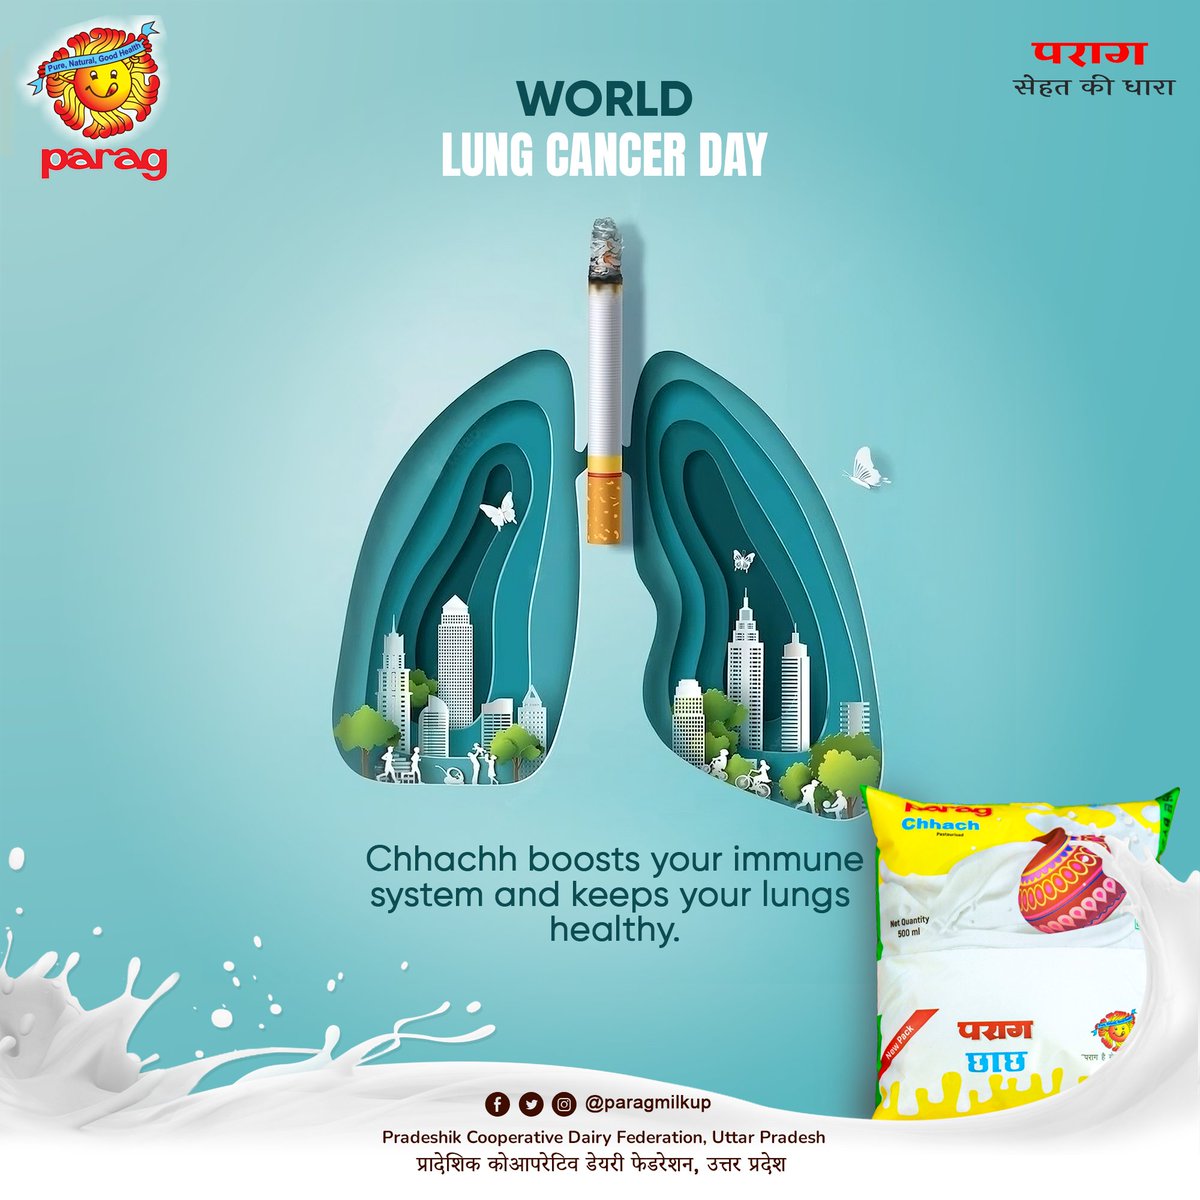 WORLD LUNG CANCER DAY
Chhachh boosts your immune system and keeps your lungs Healthy.

#worldlungcancerday #worldlungcancer #worldlungcancerawarenessmonth #worldlungcancerday2023 #lungcancerday #lungcancerdays #cancerday🎗️ #ᴄᴀɴᴄᴇʀᴅᴀʏ #chhachh #paragmilkup